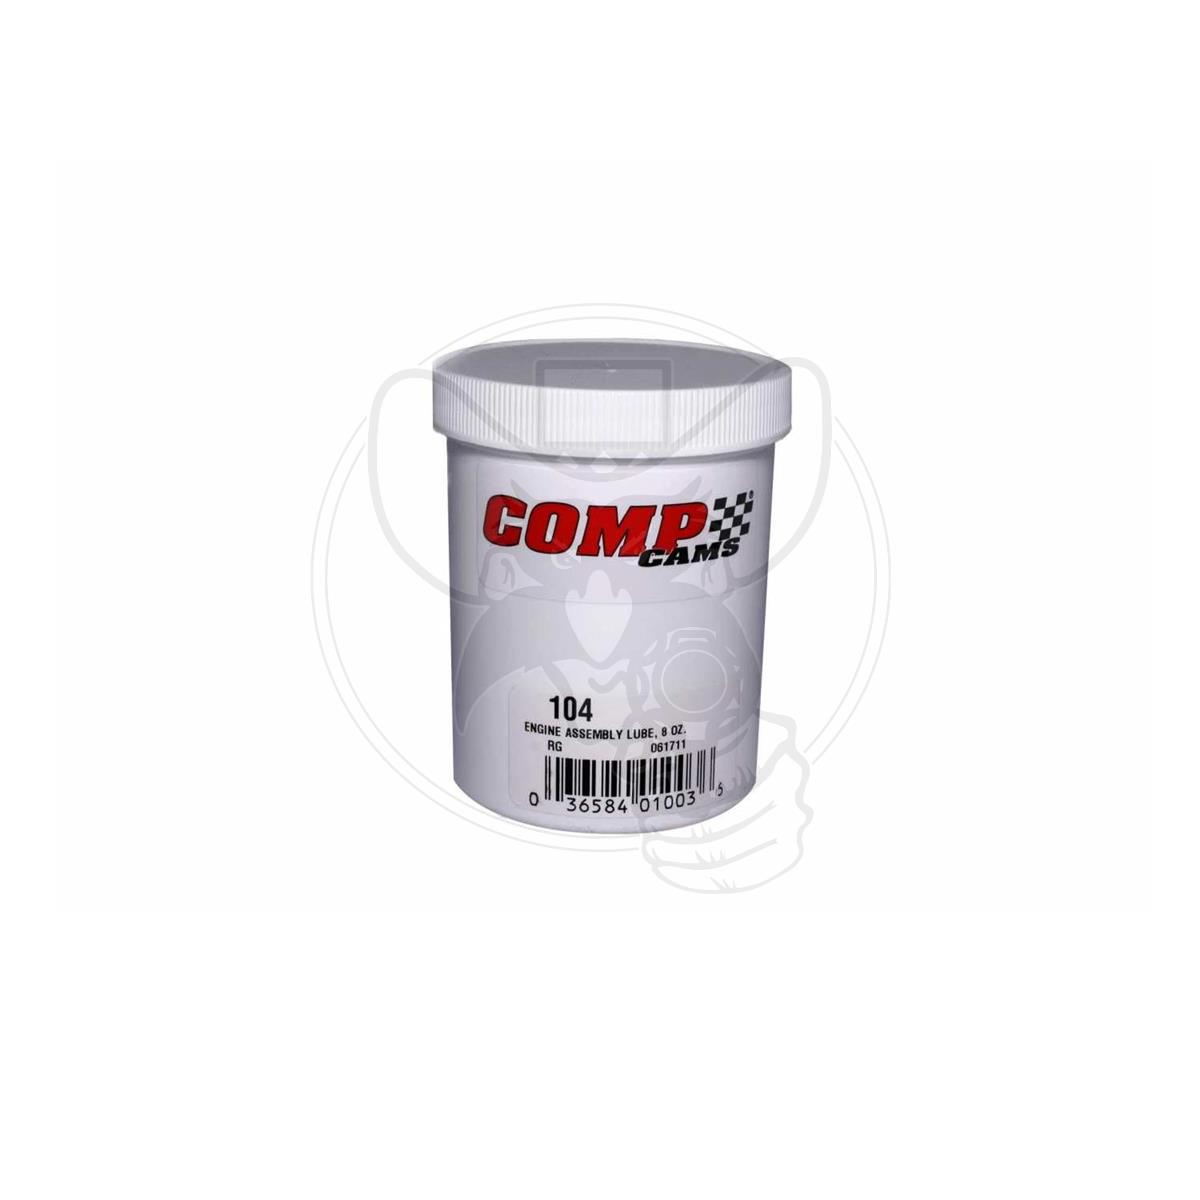 COMP CAMS ENGINE ASSEMBLY LUBE IN AN 8 OUNCE JAR